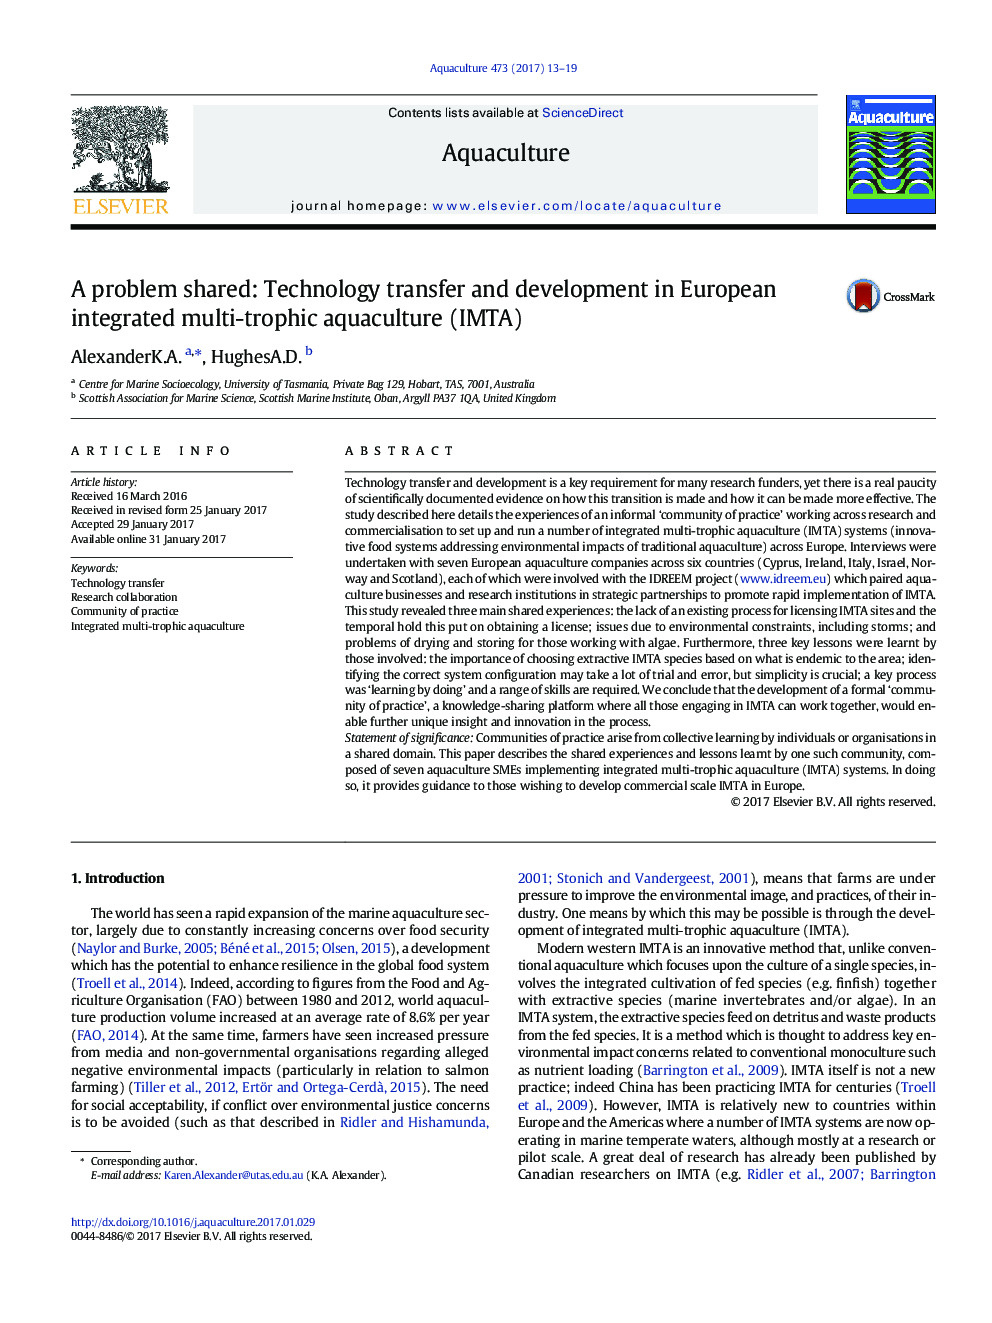 A problem shared: Technology transfer and development in European integrated multi-trophic aquaculture (IMTA)